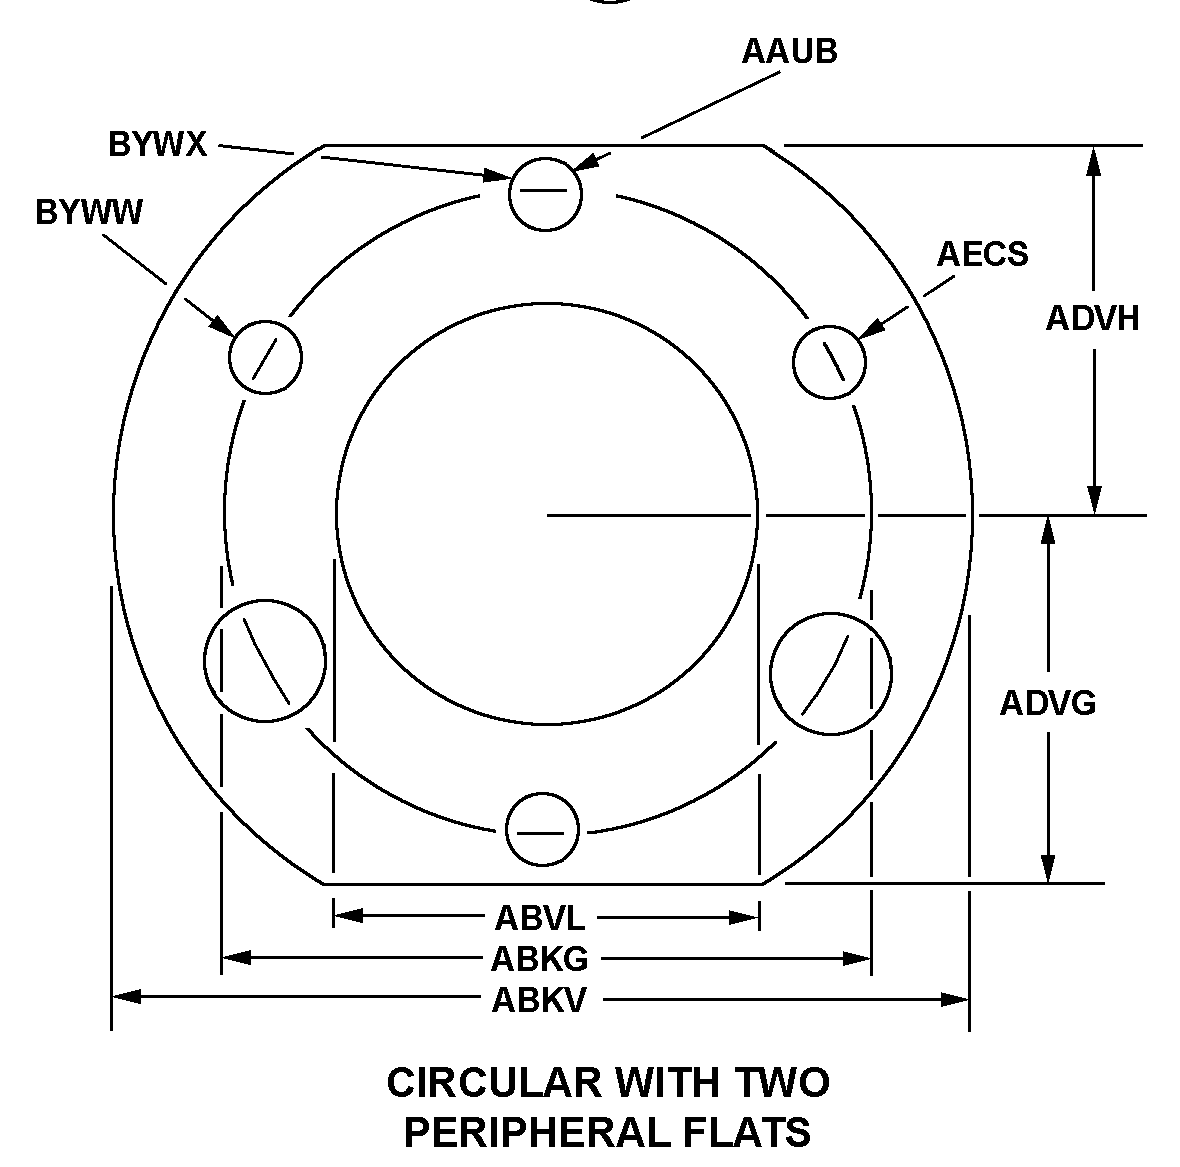 CIRCULAR WITH TWO PERIPHERAL FLATS style nsn 5330-00-520-6690